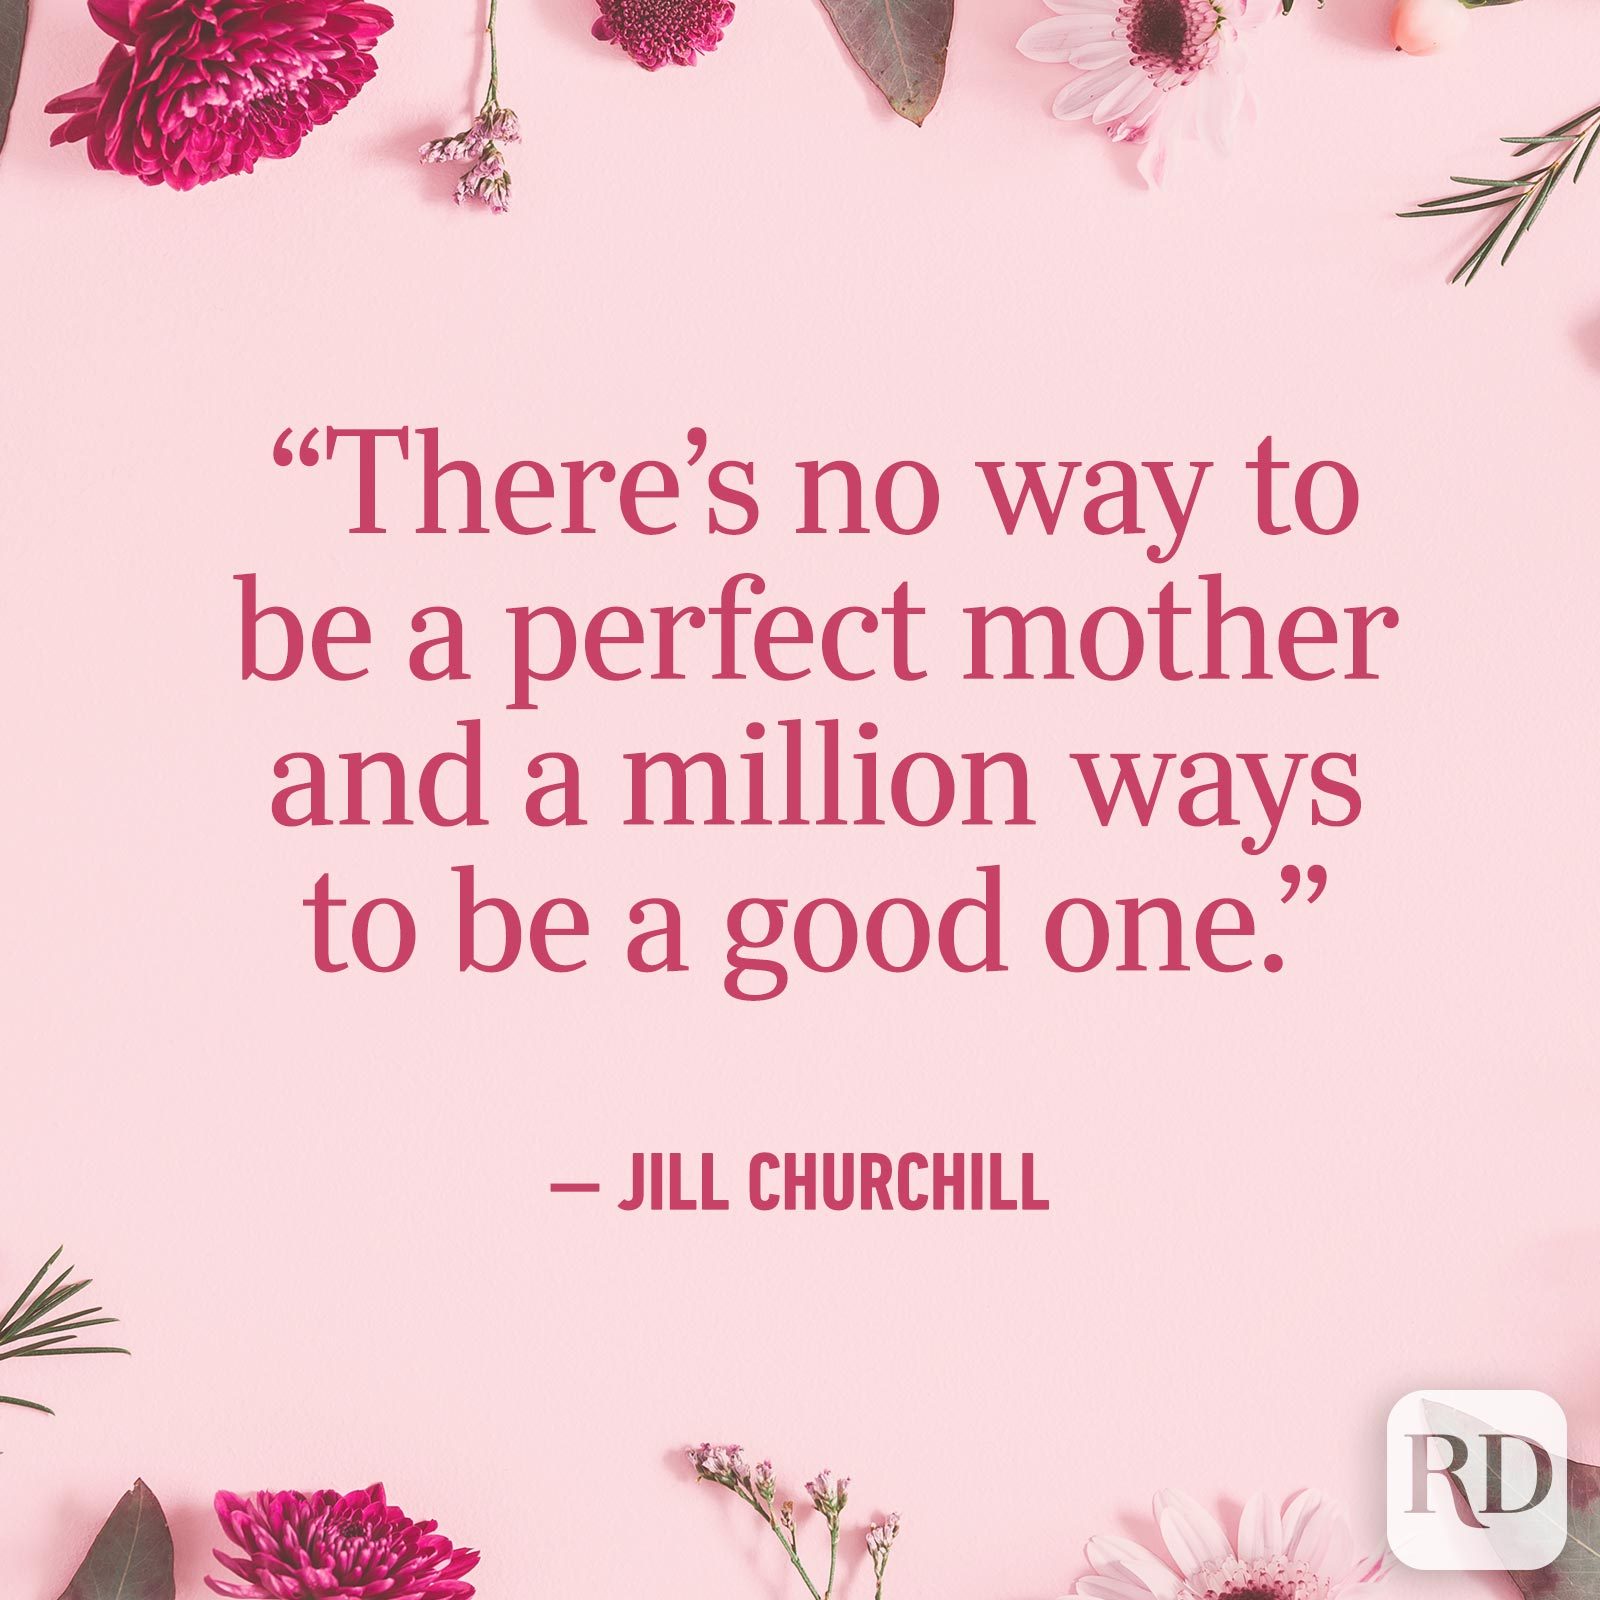 Mother's Day Quotes: 125 Happy Mother’s Day Quotes for Her